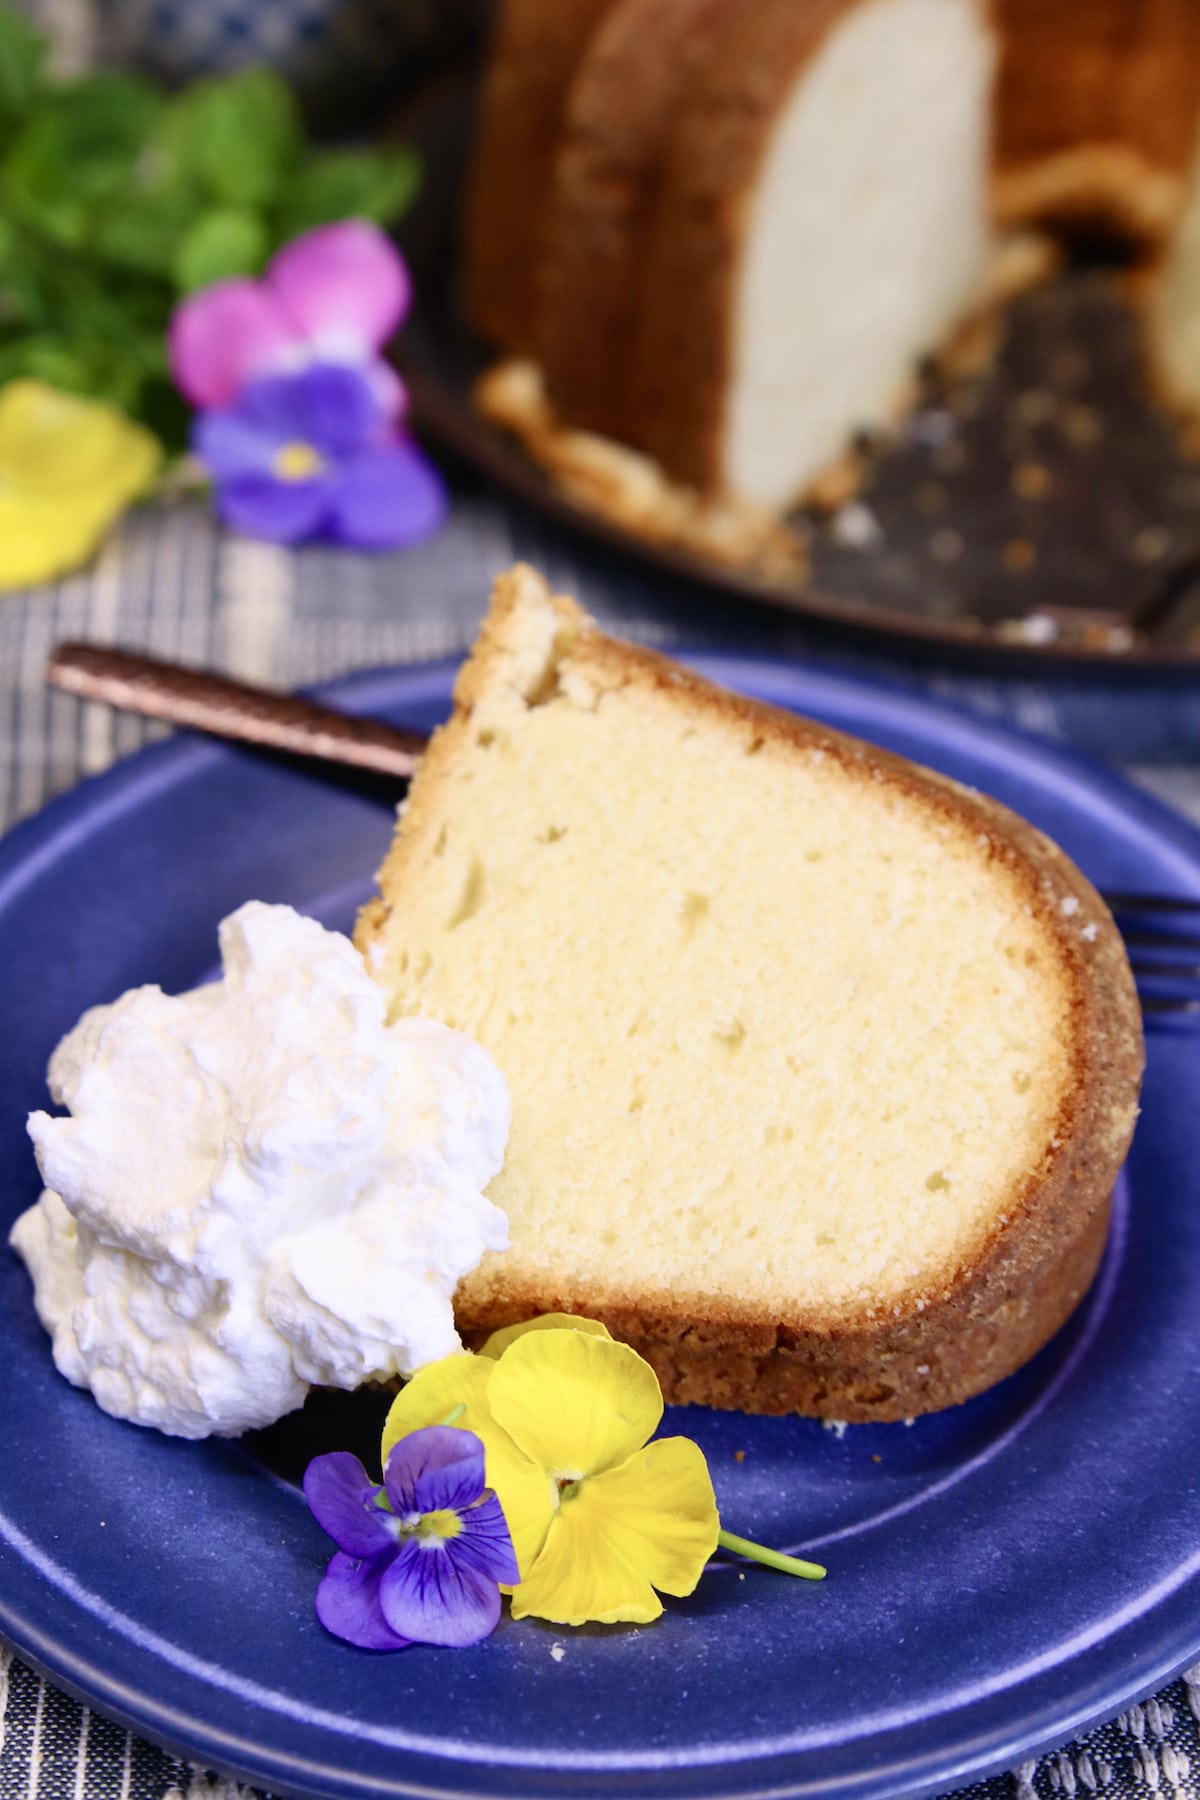 Slice of cream cheese pound cake on a blue plate with pansies.